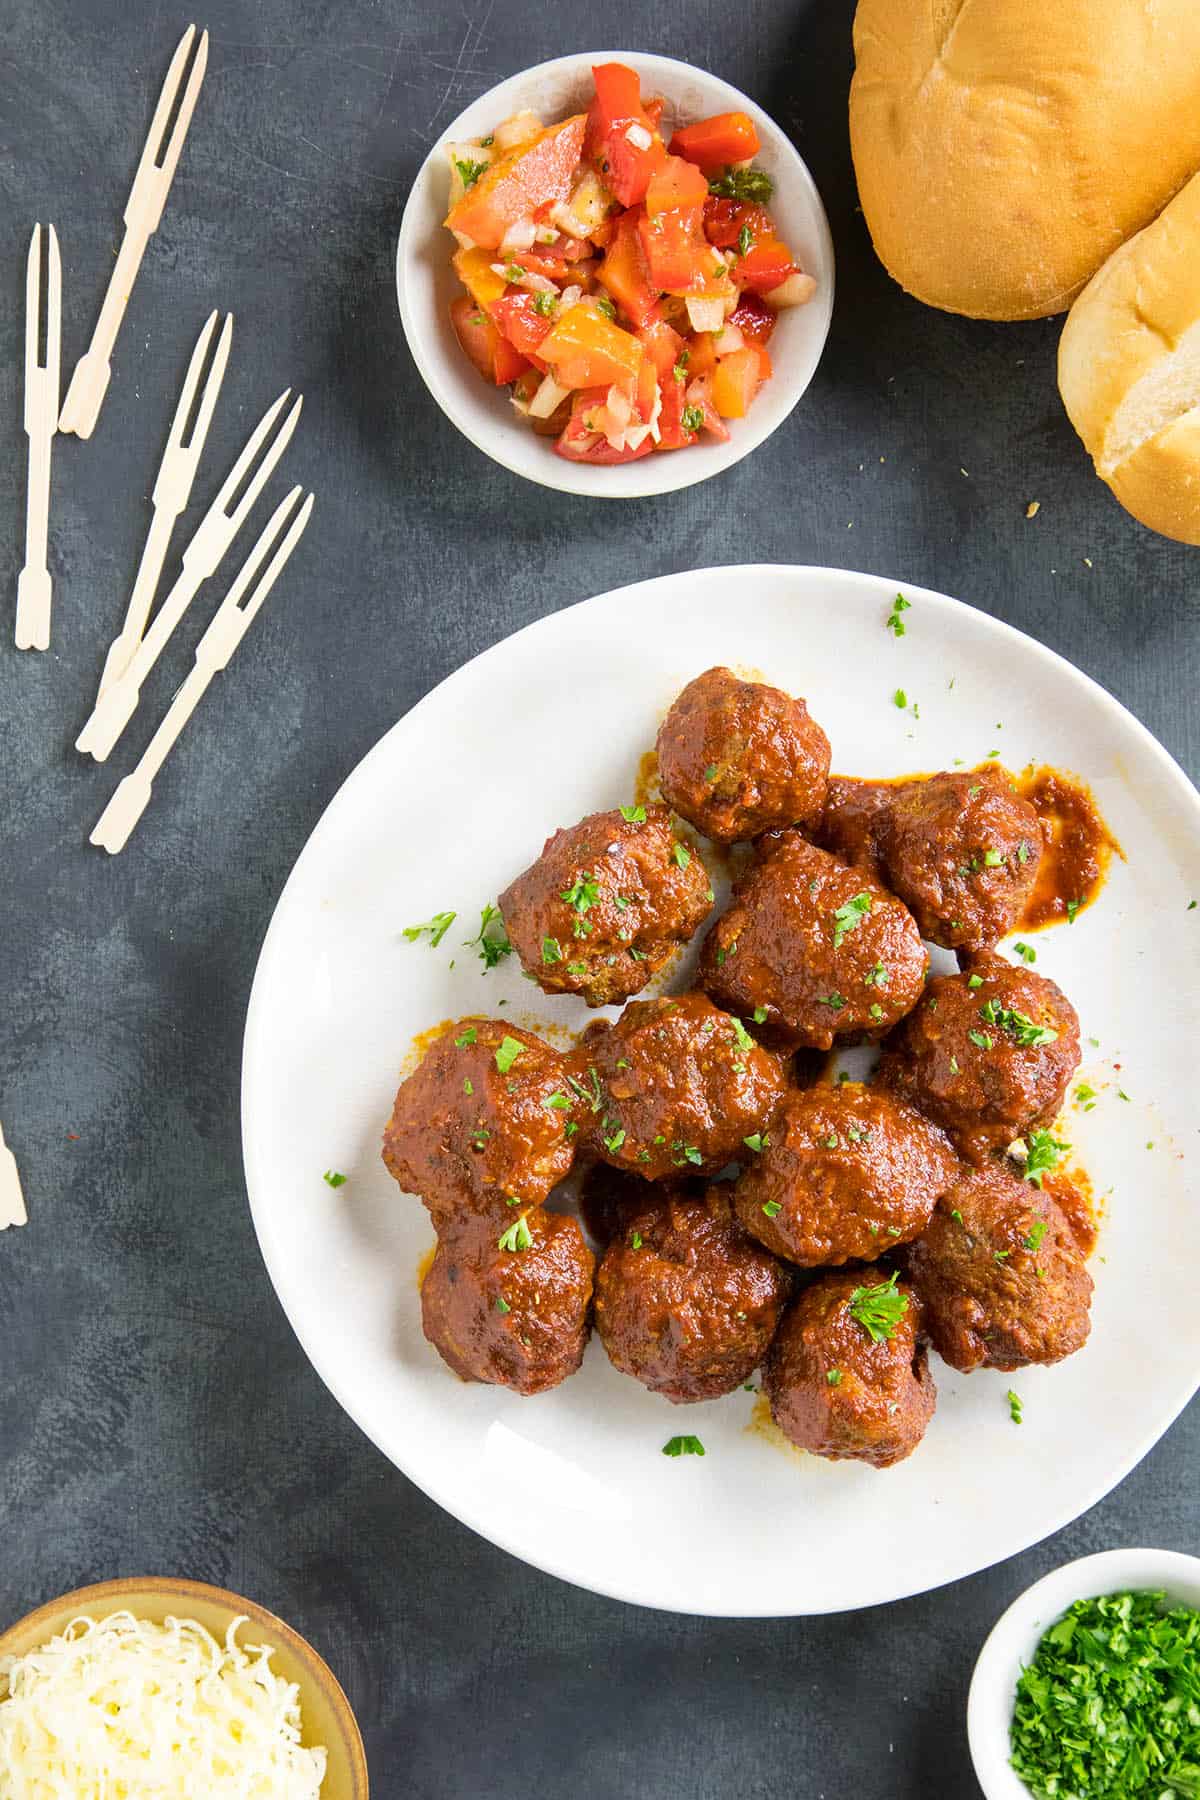 Spicy Meatballs with Chipotle-Lime Sauce - the perfect party food.